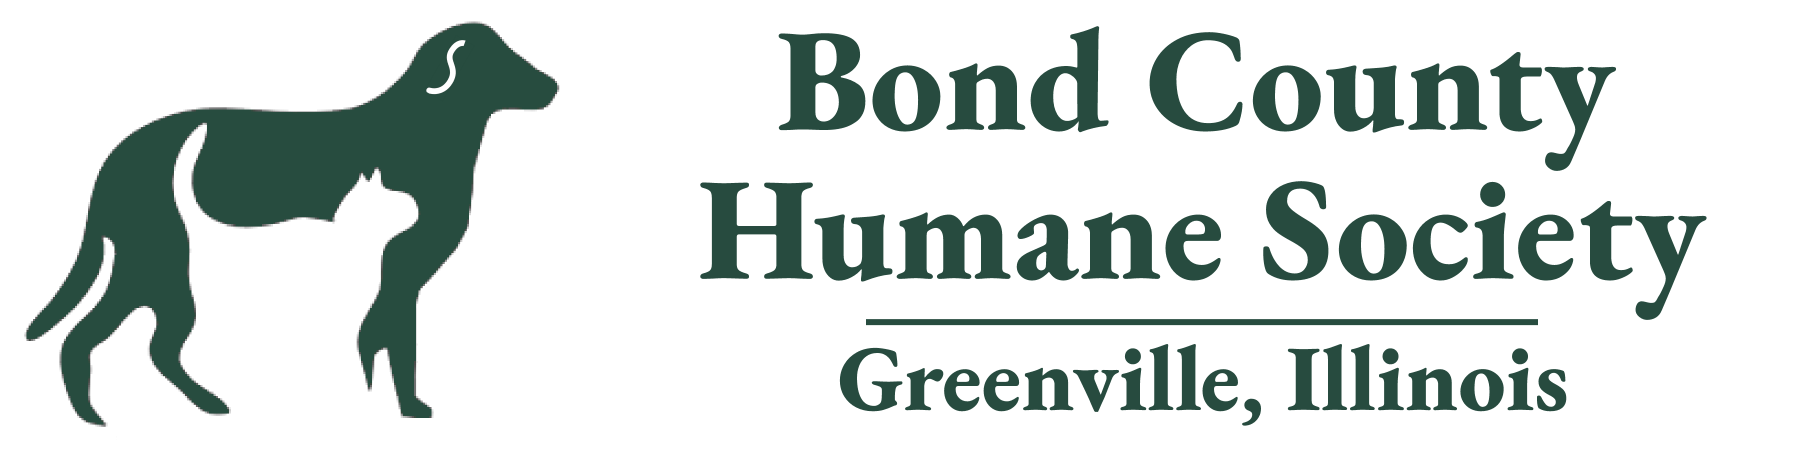 logo wide Bond County Humane Society, cat and dog